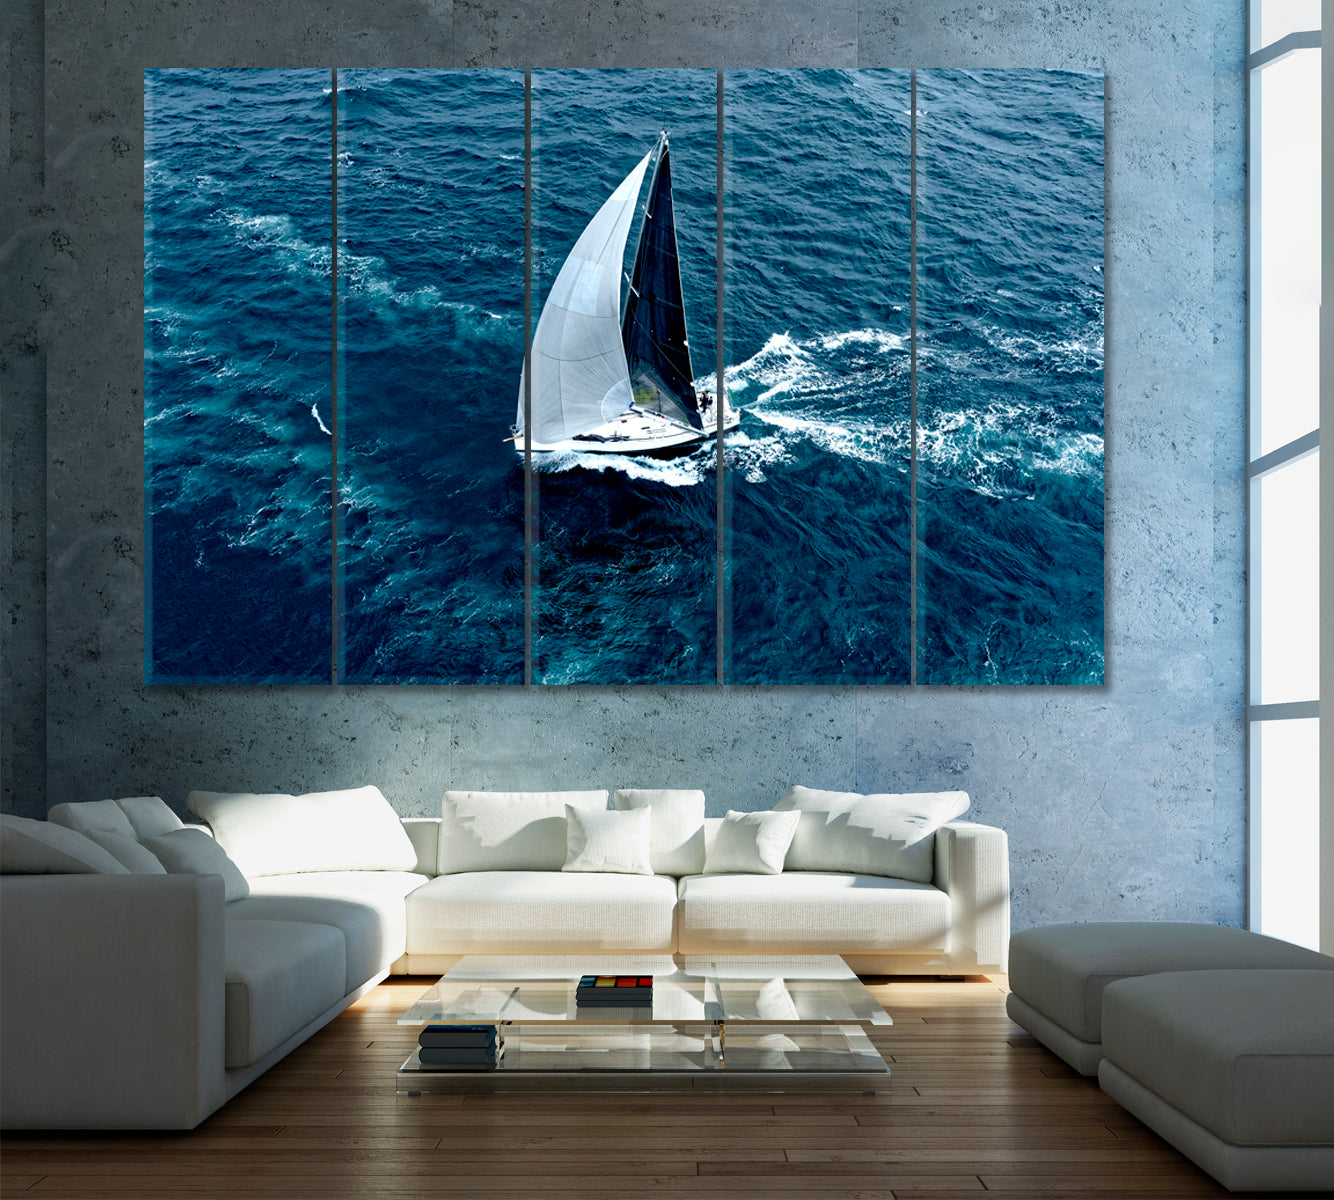 Sailboat with White Sails Canvas Print ArtLexy 5 Panels 36"x24" inches 